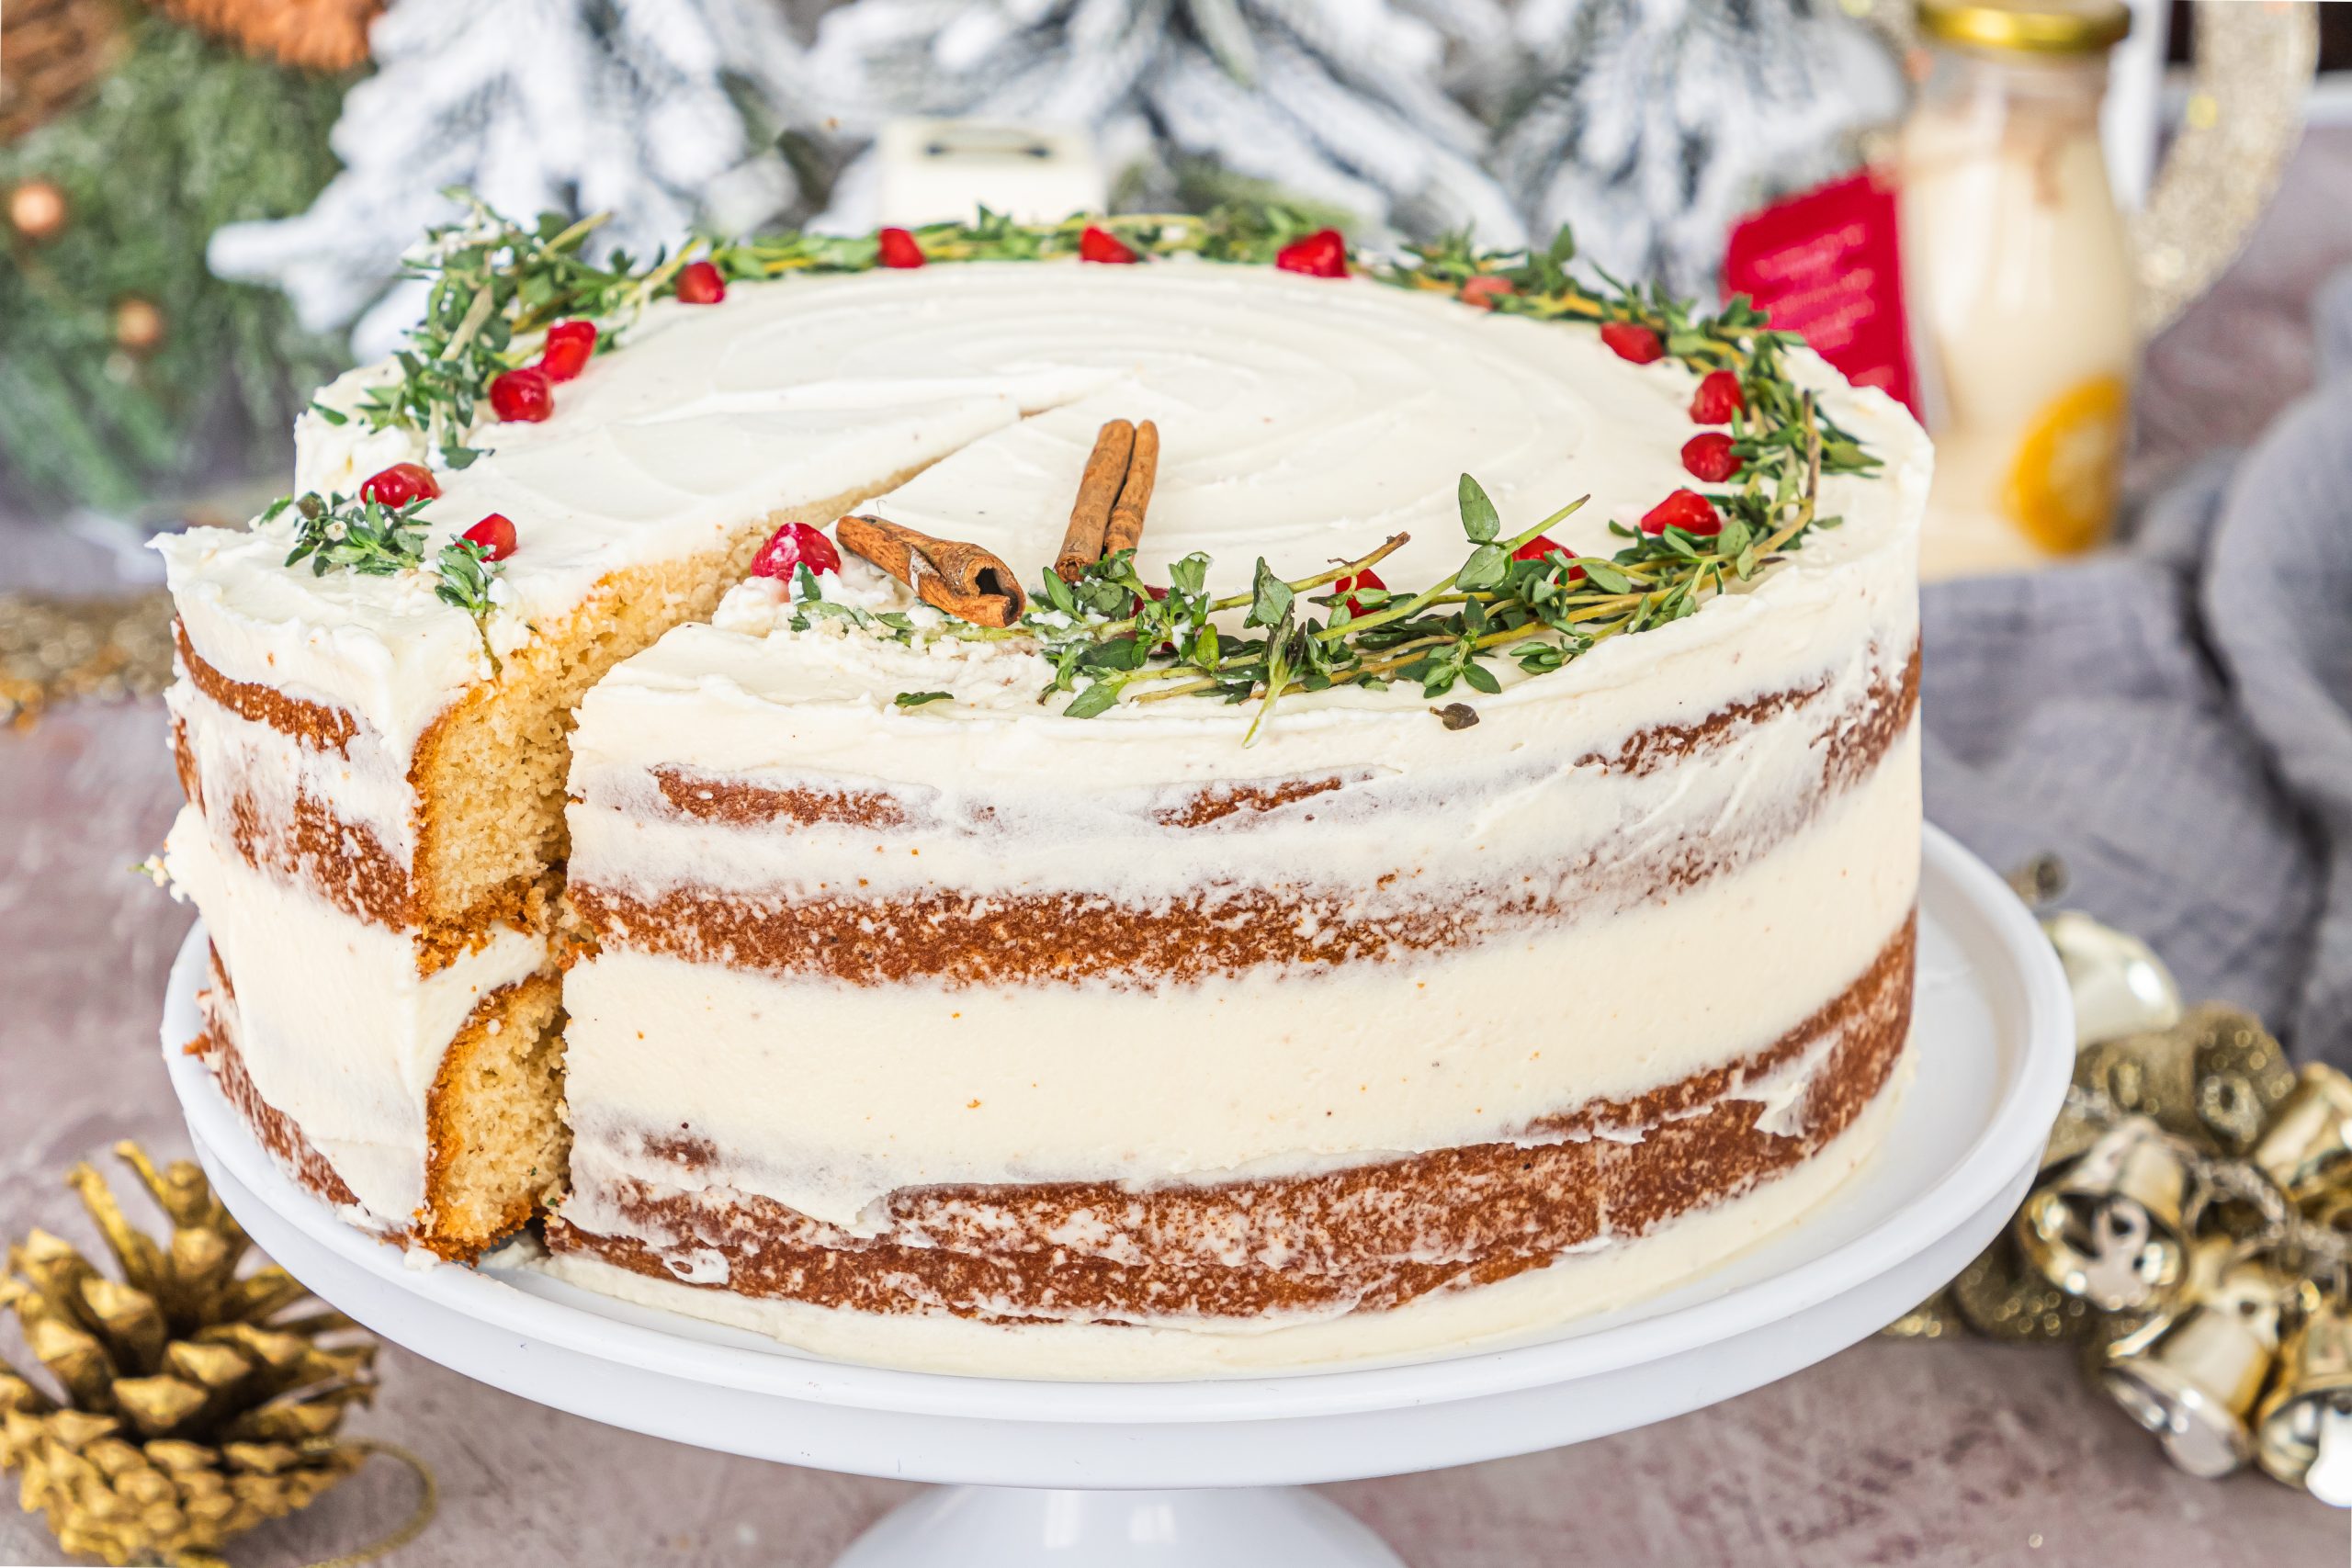 A delightful Christmas cake with a tempting slice missing, featuring an indulgent Eggnog Cream Cheese Icing.